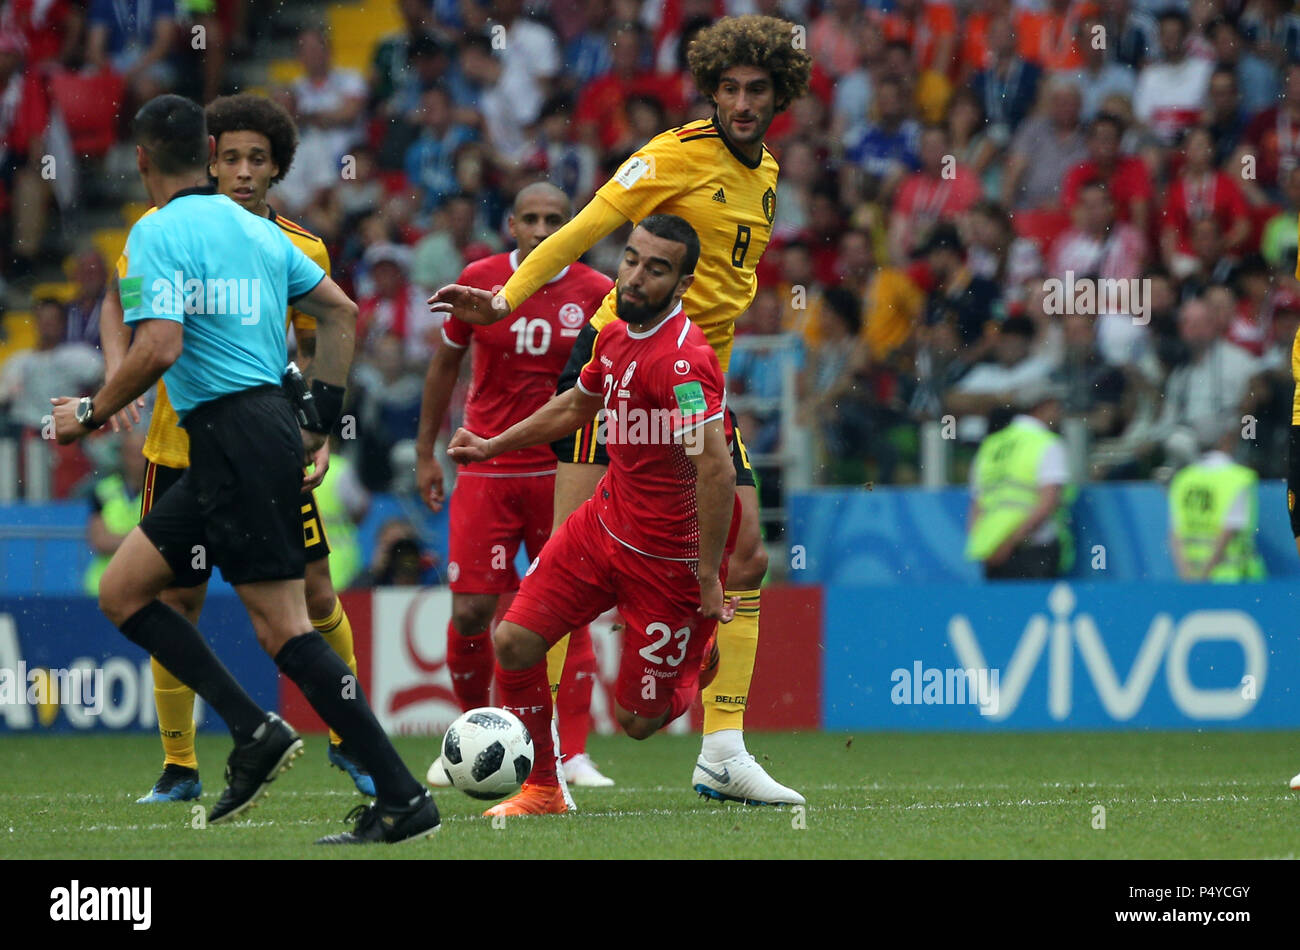 Moscow, Russian. 23rd June, 2018. 23.06.2018. Moscow, Russian:NAIM SLITI, Marouane Fellaini in action during the Fifa World Cup Russia 2018, Group C, football match between BELGIUM V TUNISIA in SPARTAK STADIUM in Moscow Stadium Credit: Independent Photo Agency/Alamy Live News Stock Photo